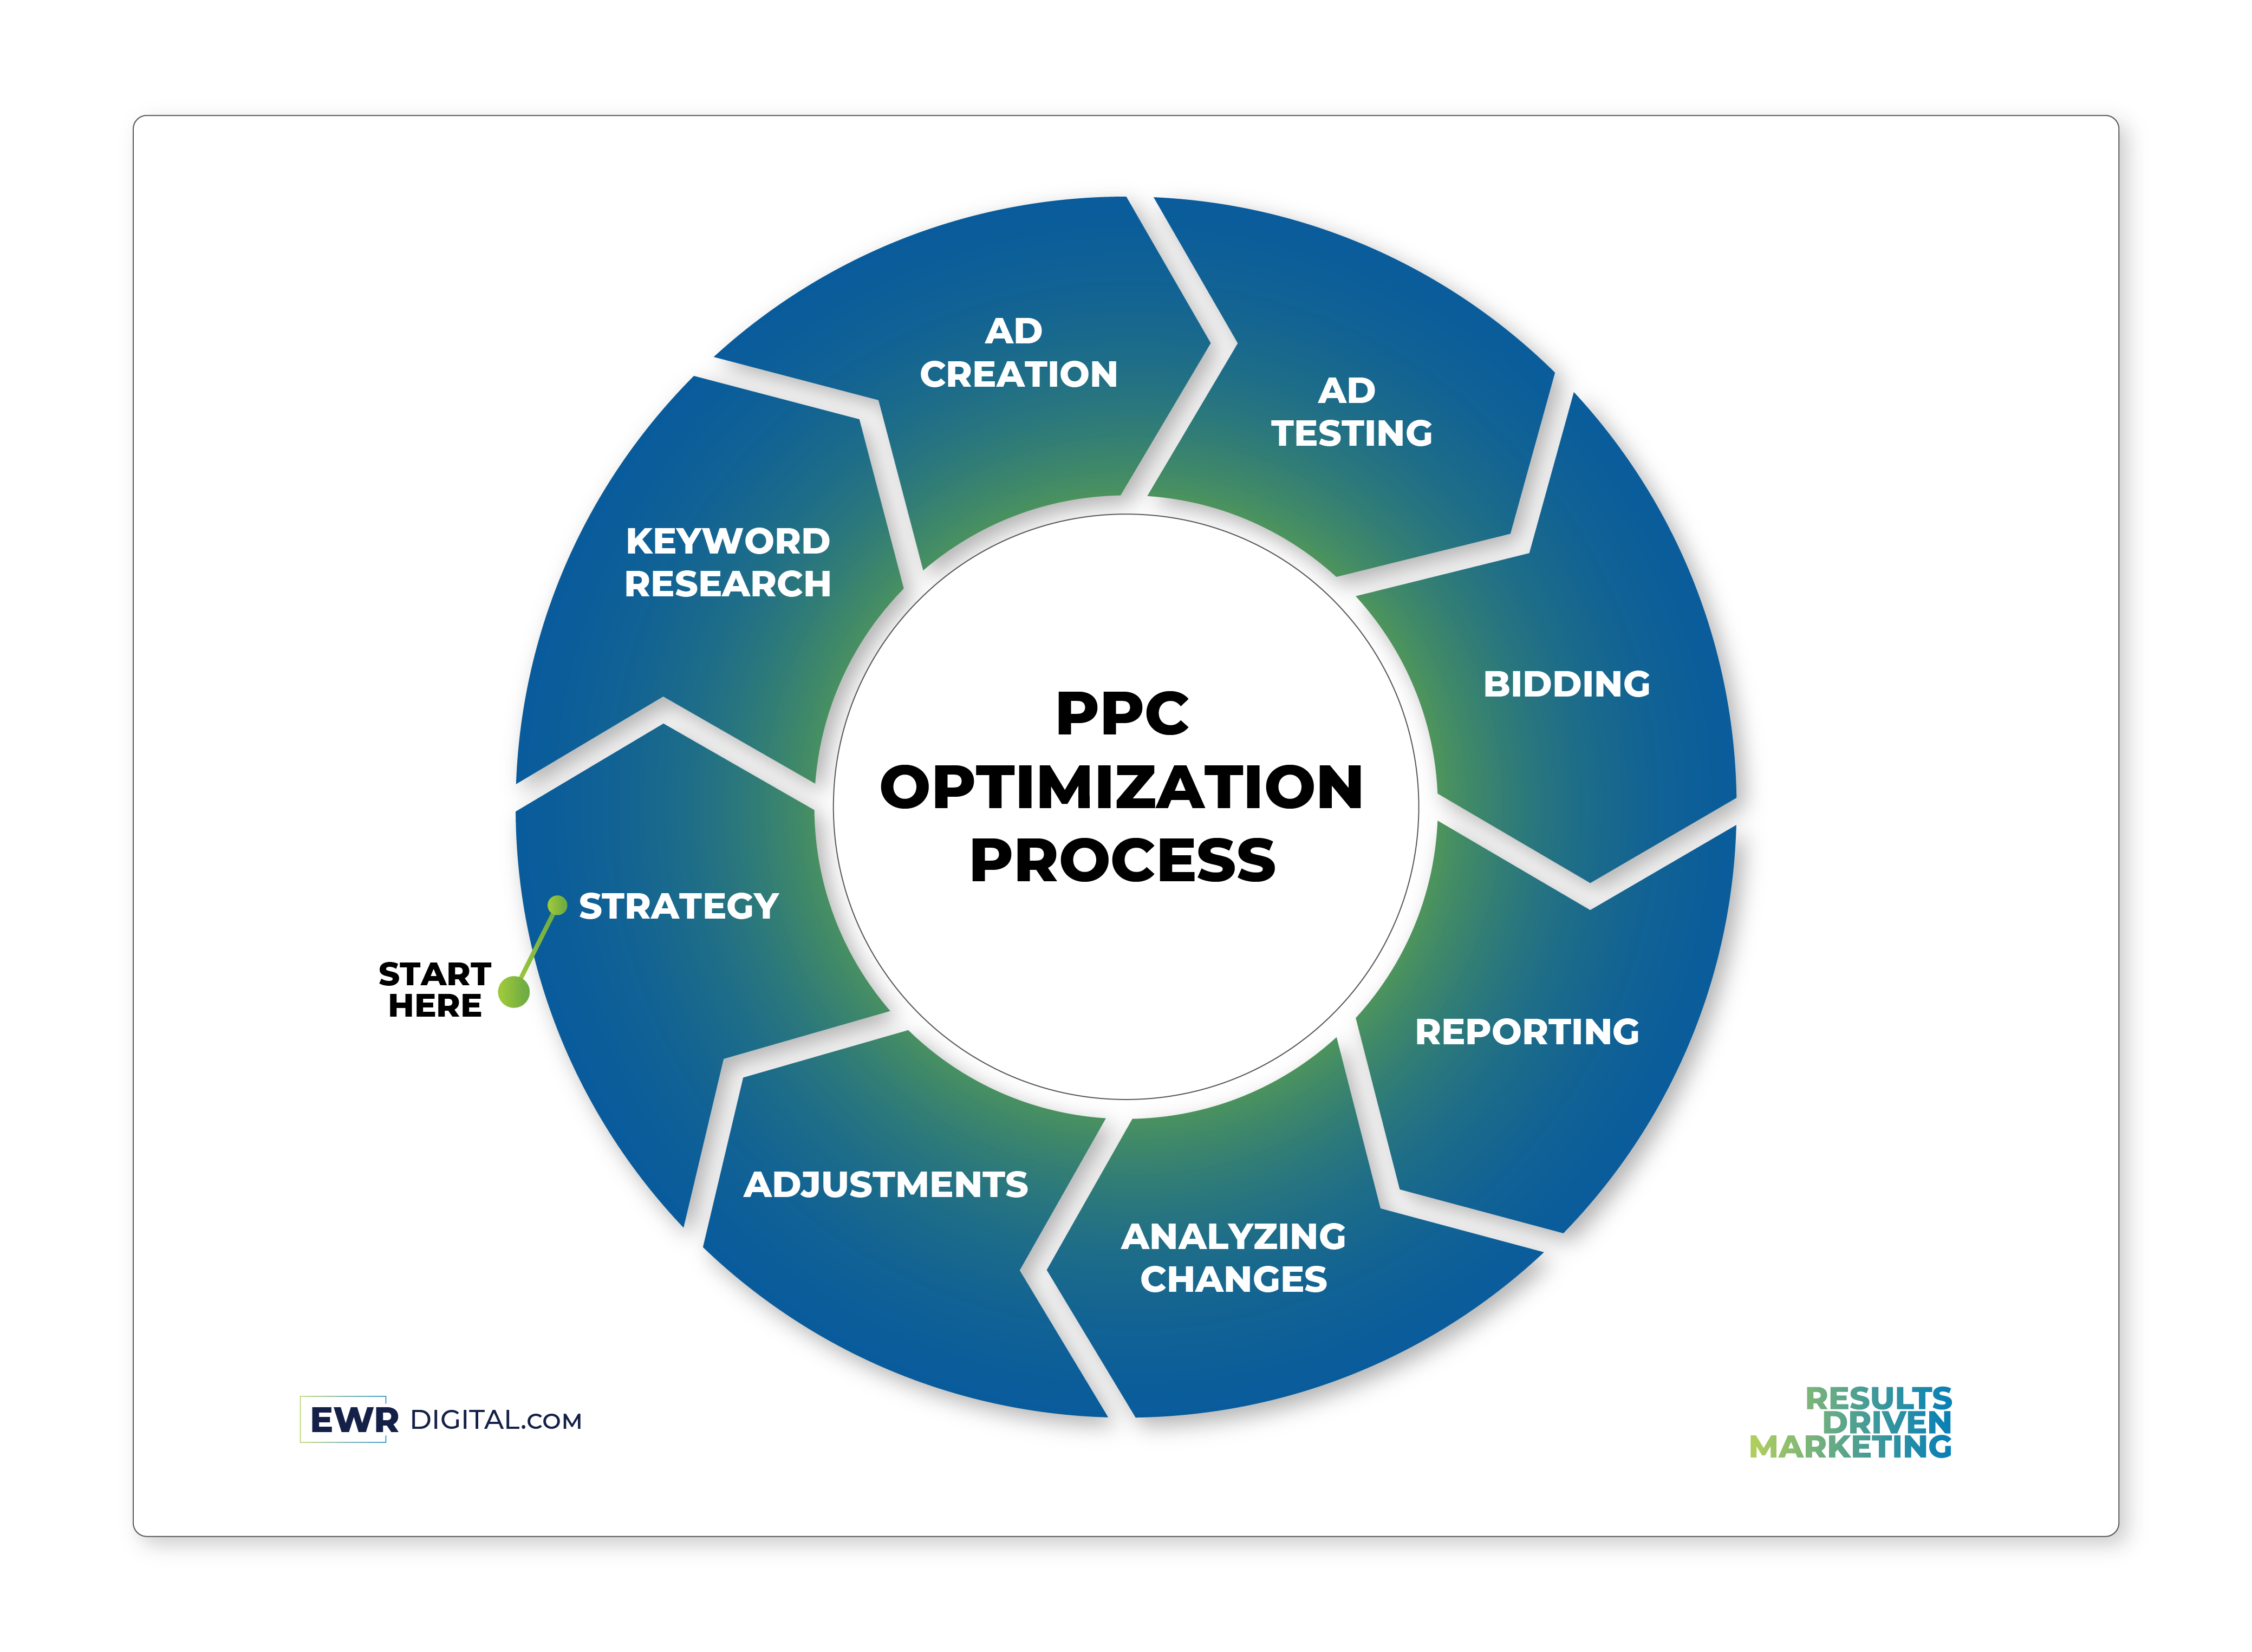 PPC Optimization Process - A visual representation of the steps involved in optimizing PPC campaigns.